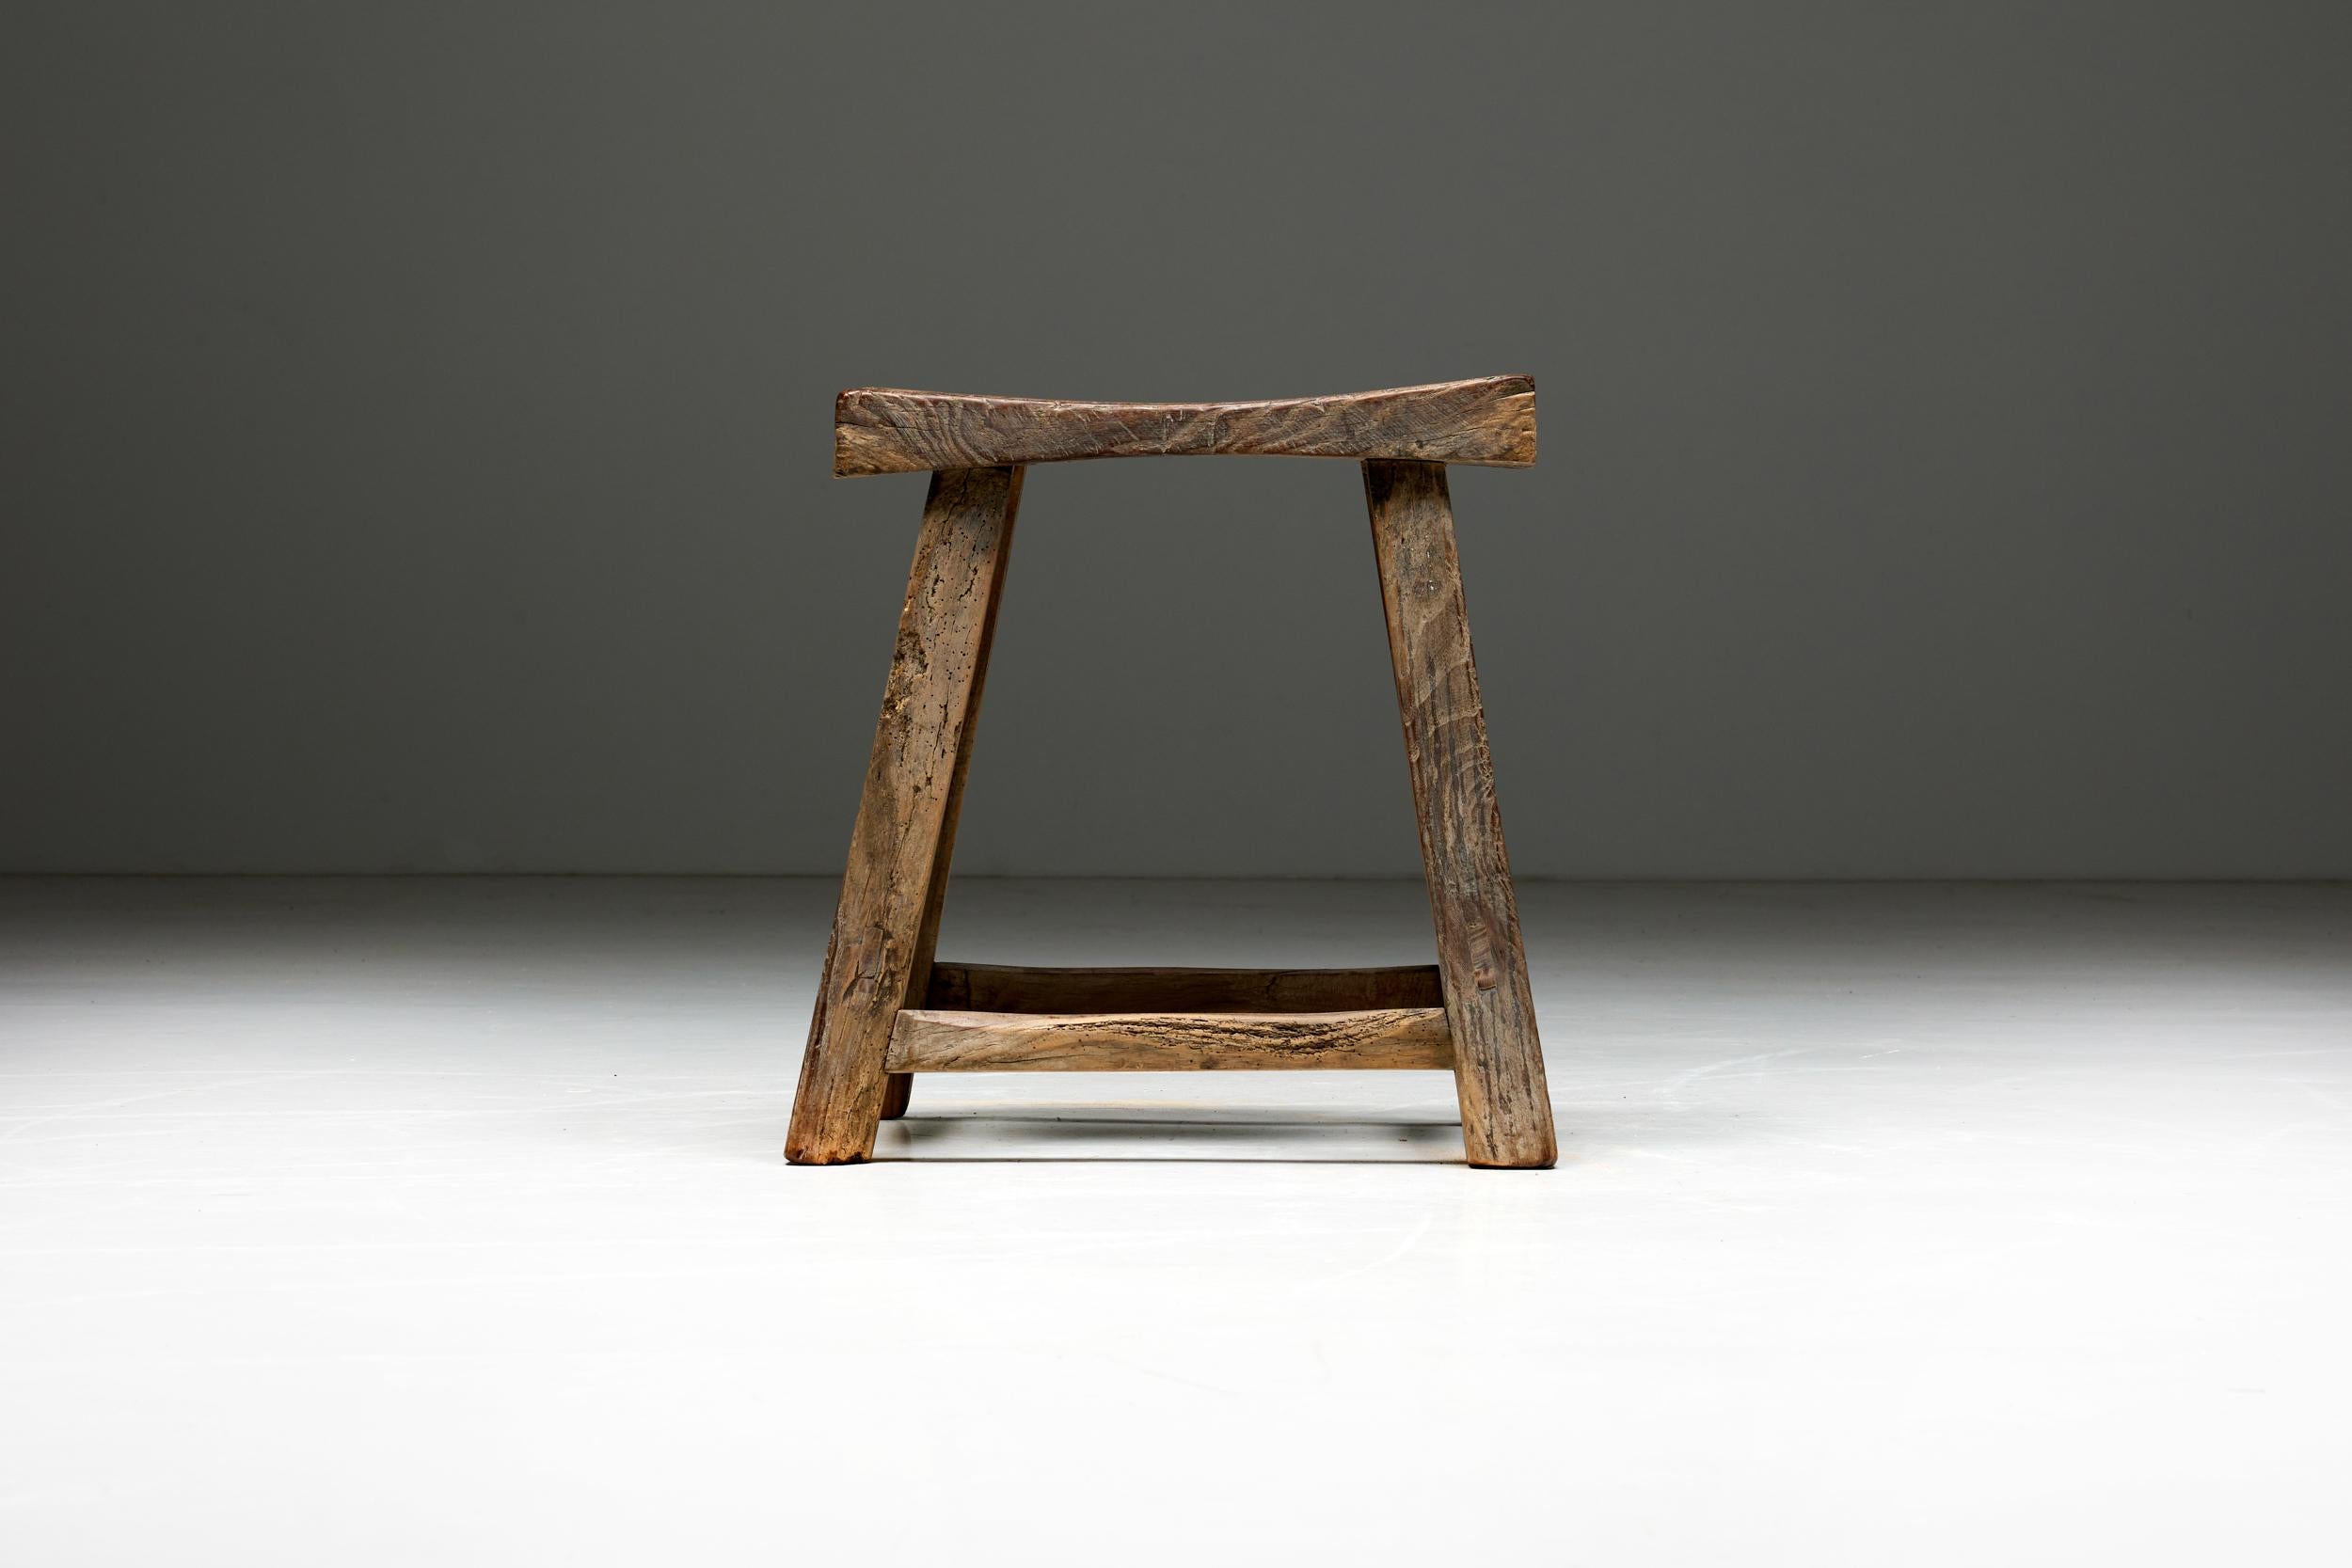 Wood Rustic Travail Populaire Stool, France, Early 20th Century For Sale